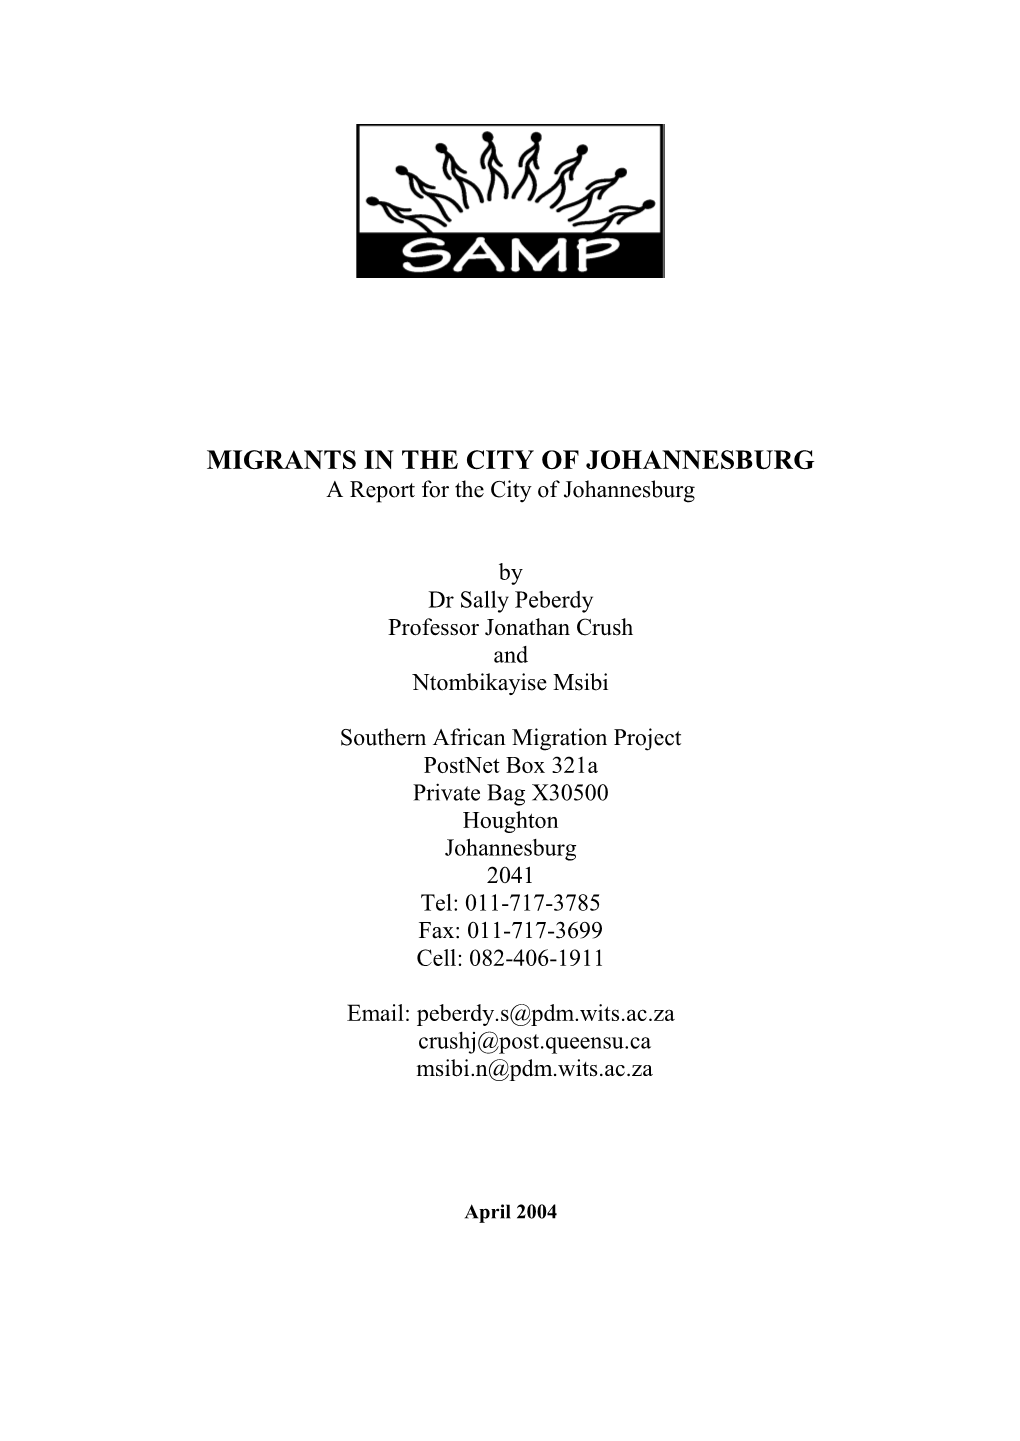 MIGRANTS in the CITY of JOHANNESBURG a Report for the City of Johannesburg